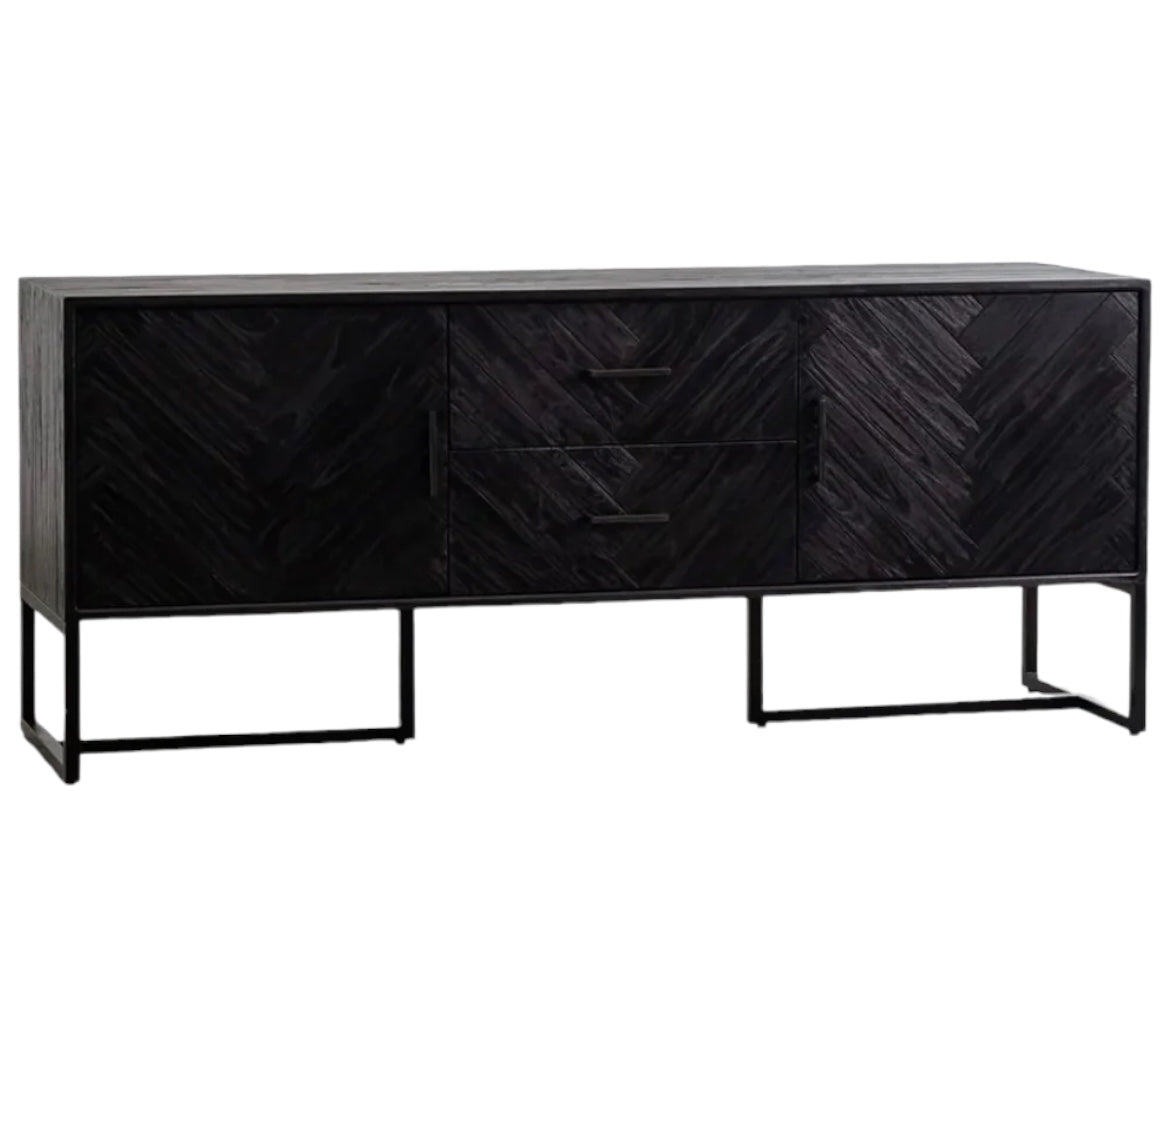 HAND MADE AXEL BLACK SCANDINAVIAN INSPIRED WOODEN SIDEBOARD CONSOLE